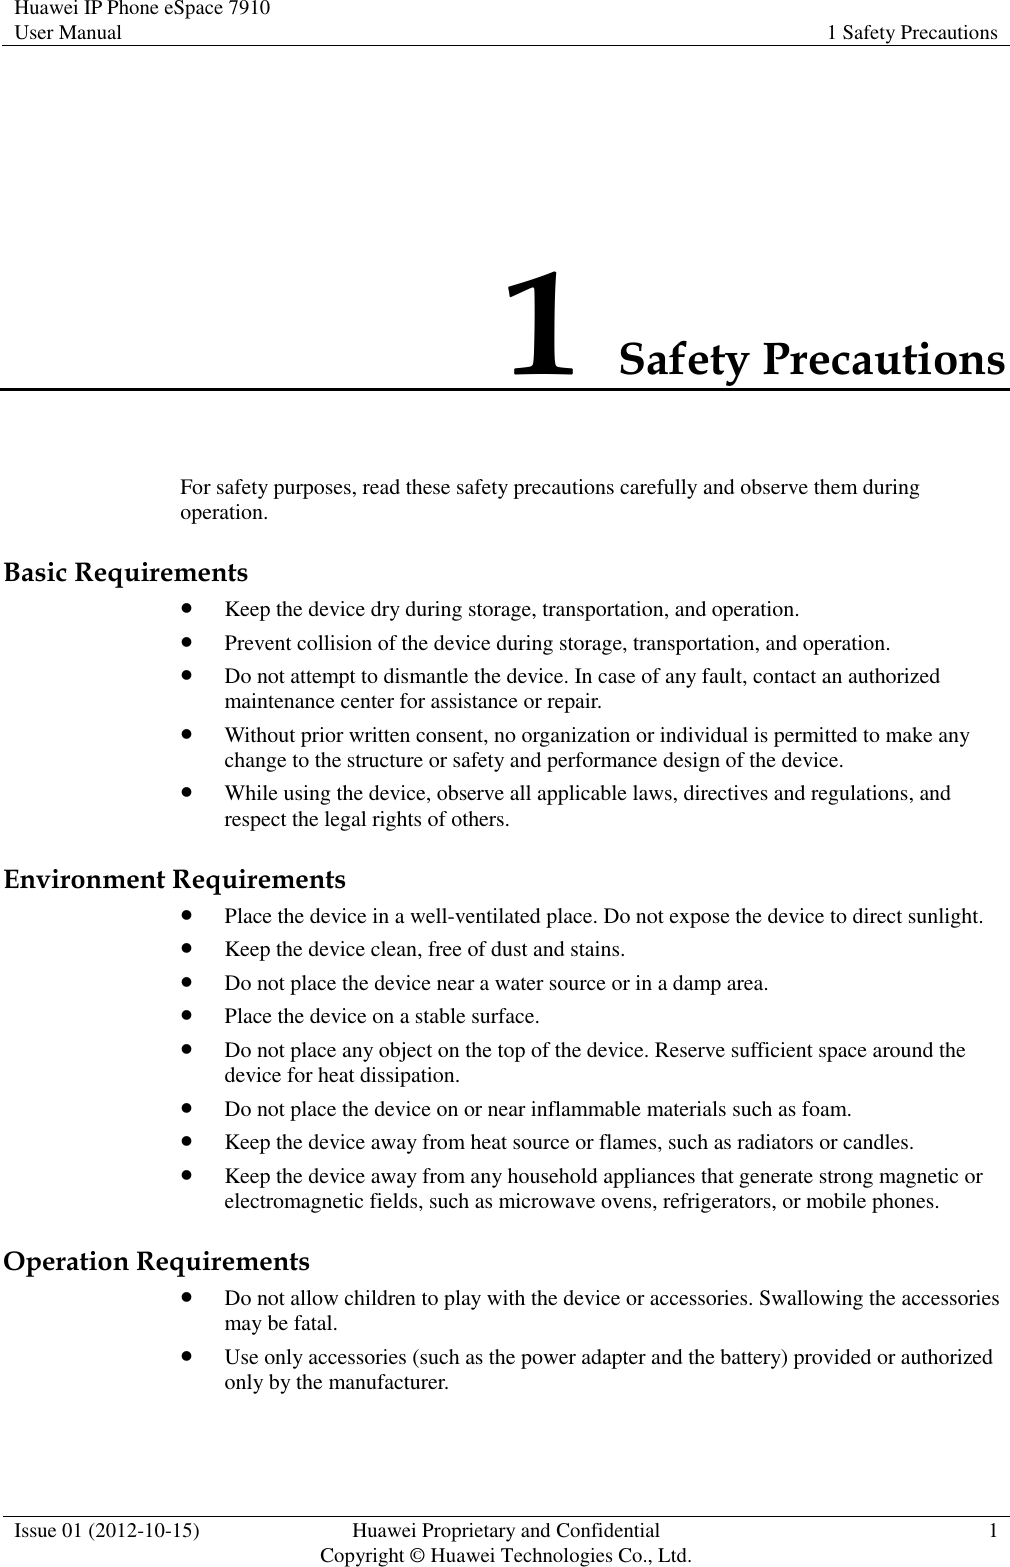 Huawei IP Phone eSpace 7910 User Manual 1 Safety Precautions  Issue 01 (2012-10-15) Huawei Proprietary and Confidential                                     Copyright © Huawei Technologies Co., Ltd. 1  1 Safety Precautions For safety purposes, read these safety precautions carefully and observe them during operation. Basic Requirements  Keep the device dry during storage, transportation, and operation.  Prevent collision of the device during storage, transportation, and operation.  Do not attempt to dismantle the device. In case of any fault, contact an authorized maintenance center for assistance or repair.  Without prior written consent, no organization or individual is permitted to make any change to the structure or safety and performance design of the device.  While using the device, observe all applicable laws, directives and regulations, and respect the legal rights of others. Environment Requirements  Place the device in a well-ventilated place. Do not expose the device to direct sunlight.  Keep the device clean, free of dust and stains.  Do not place the device near a water source or in a damp area.  Place the device on a stable surface.  Do not place any object on the top of the device. Reserve sufficient space around the device for heat dissipation.  Do not place the device on or near inflammable materials such as foam.  Keep the device away from heat source or flames, such as radiators or candles.  Keep the device away from any household appliances that generate strong magnetic or electromagnetic fields, such as microwave ovens, refrigerators, or mobile phones. Operation Requirements  Do not allow children to play with the device or accessories. Swallowing the accessories may be fatal.  Use only accessories (such as the power adapter and the battery) provided or authorized only by the manufacturer. 